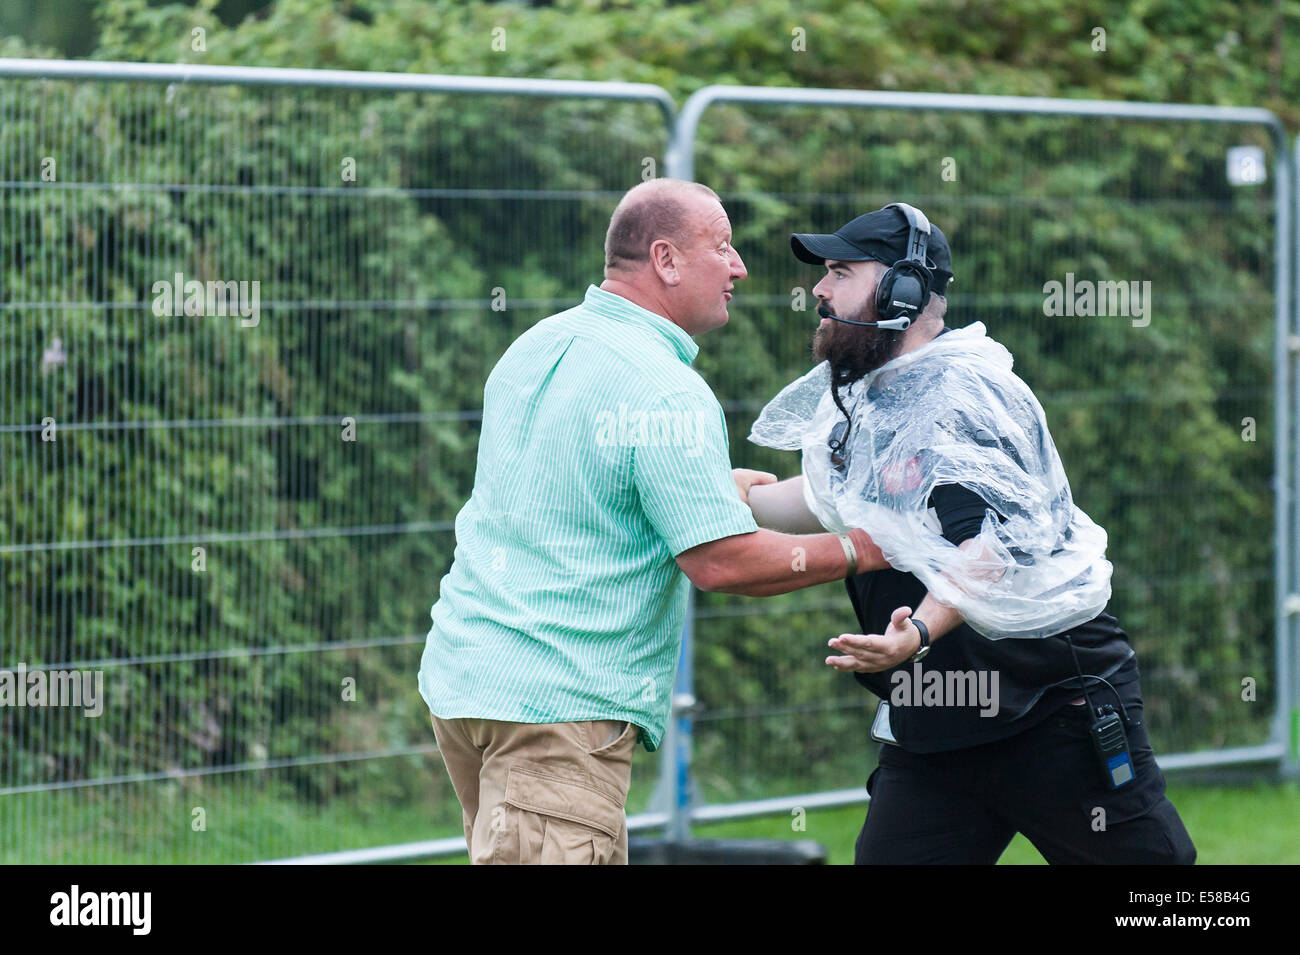 A confrontation between a security guard stopping a member of the public. Stock Photo